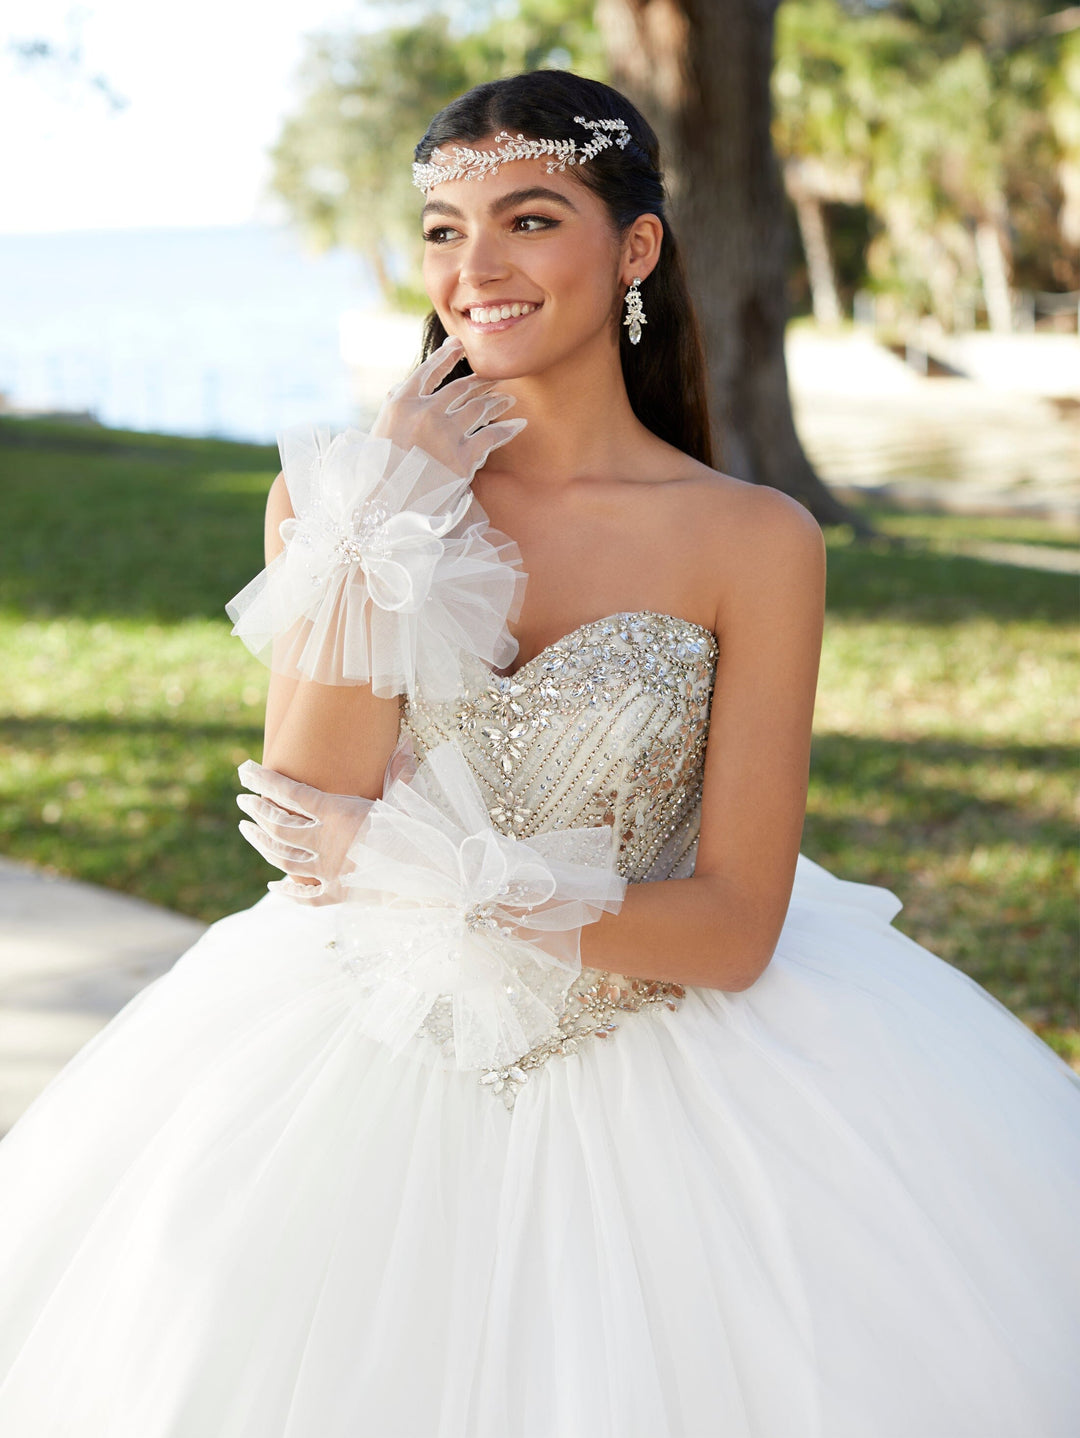 Beaded Strapless Quinceanera Dress by Fiesta Gowns 56485